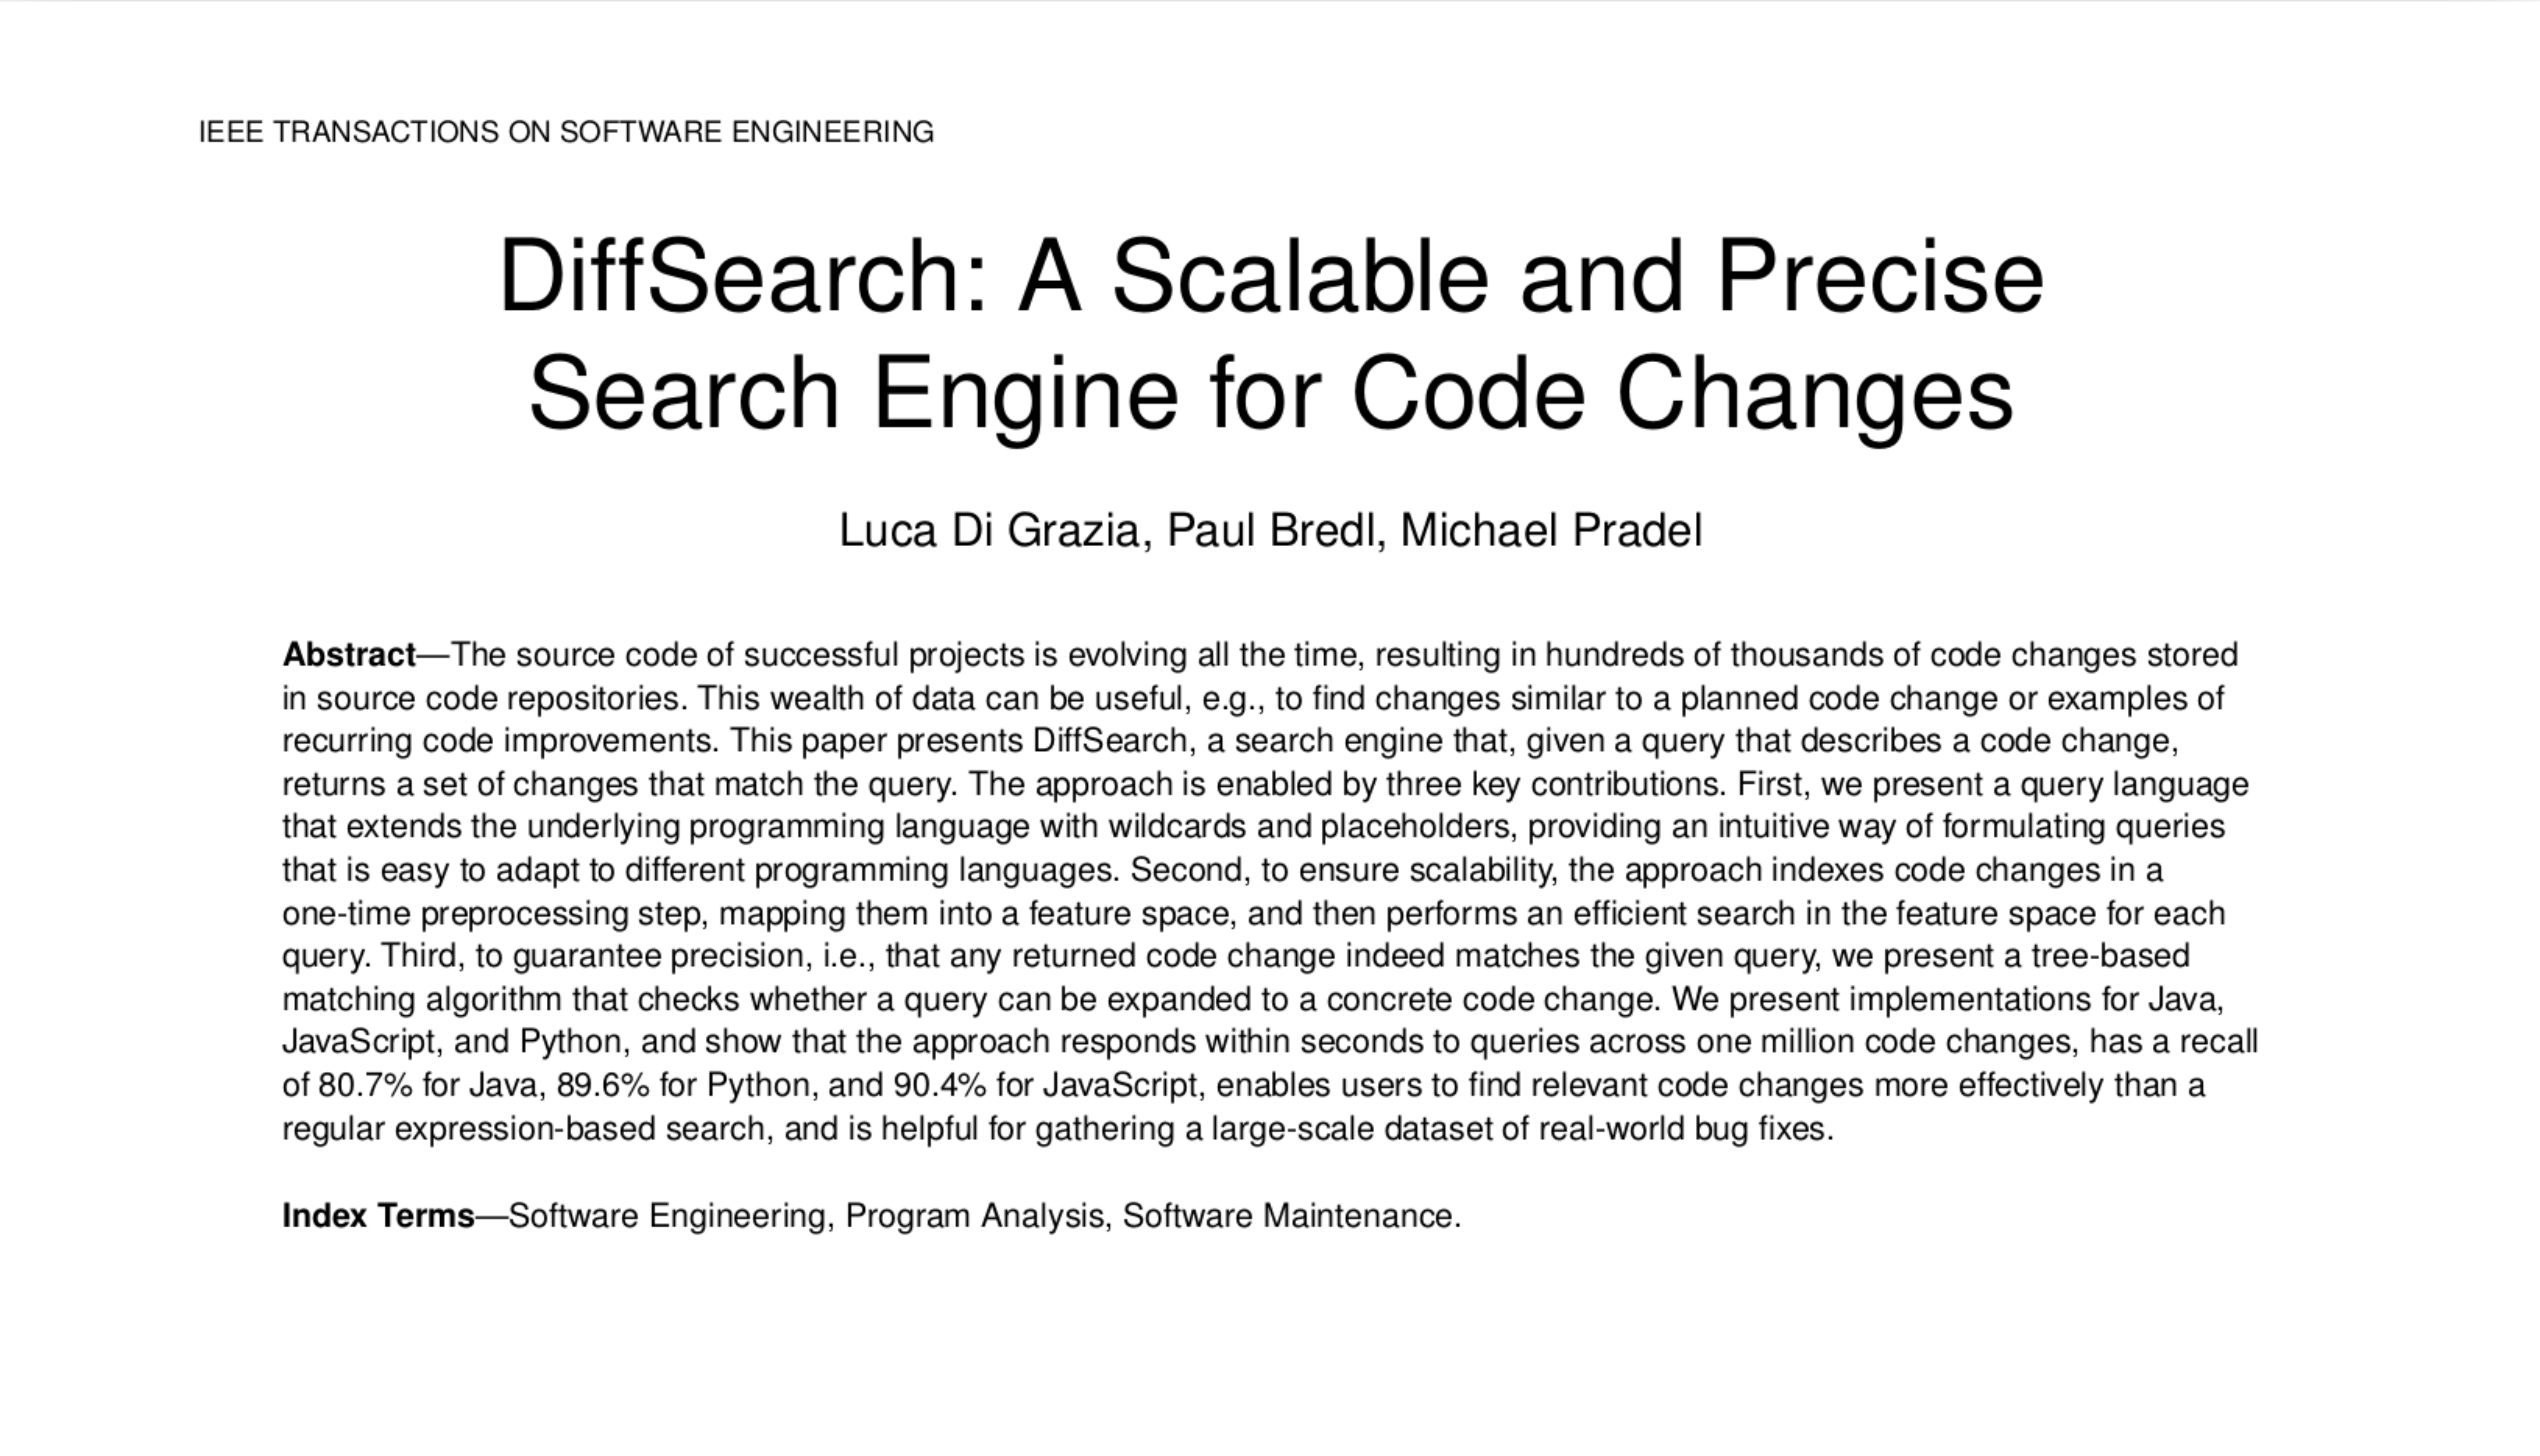 We present a scalable and precise search engine for code
            changes.